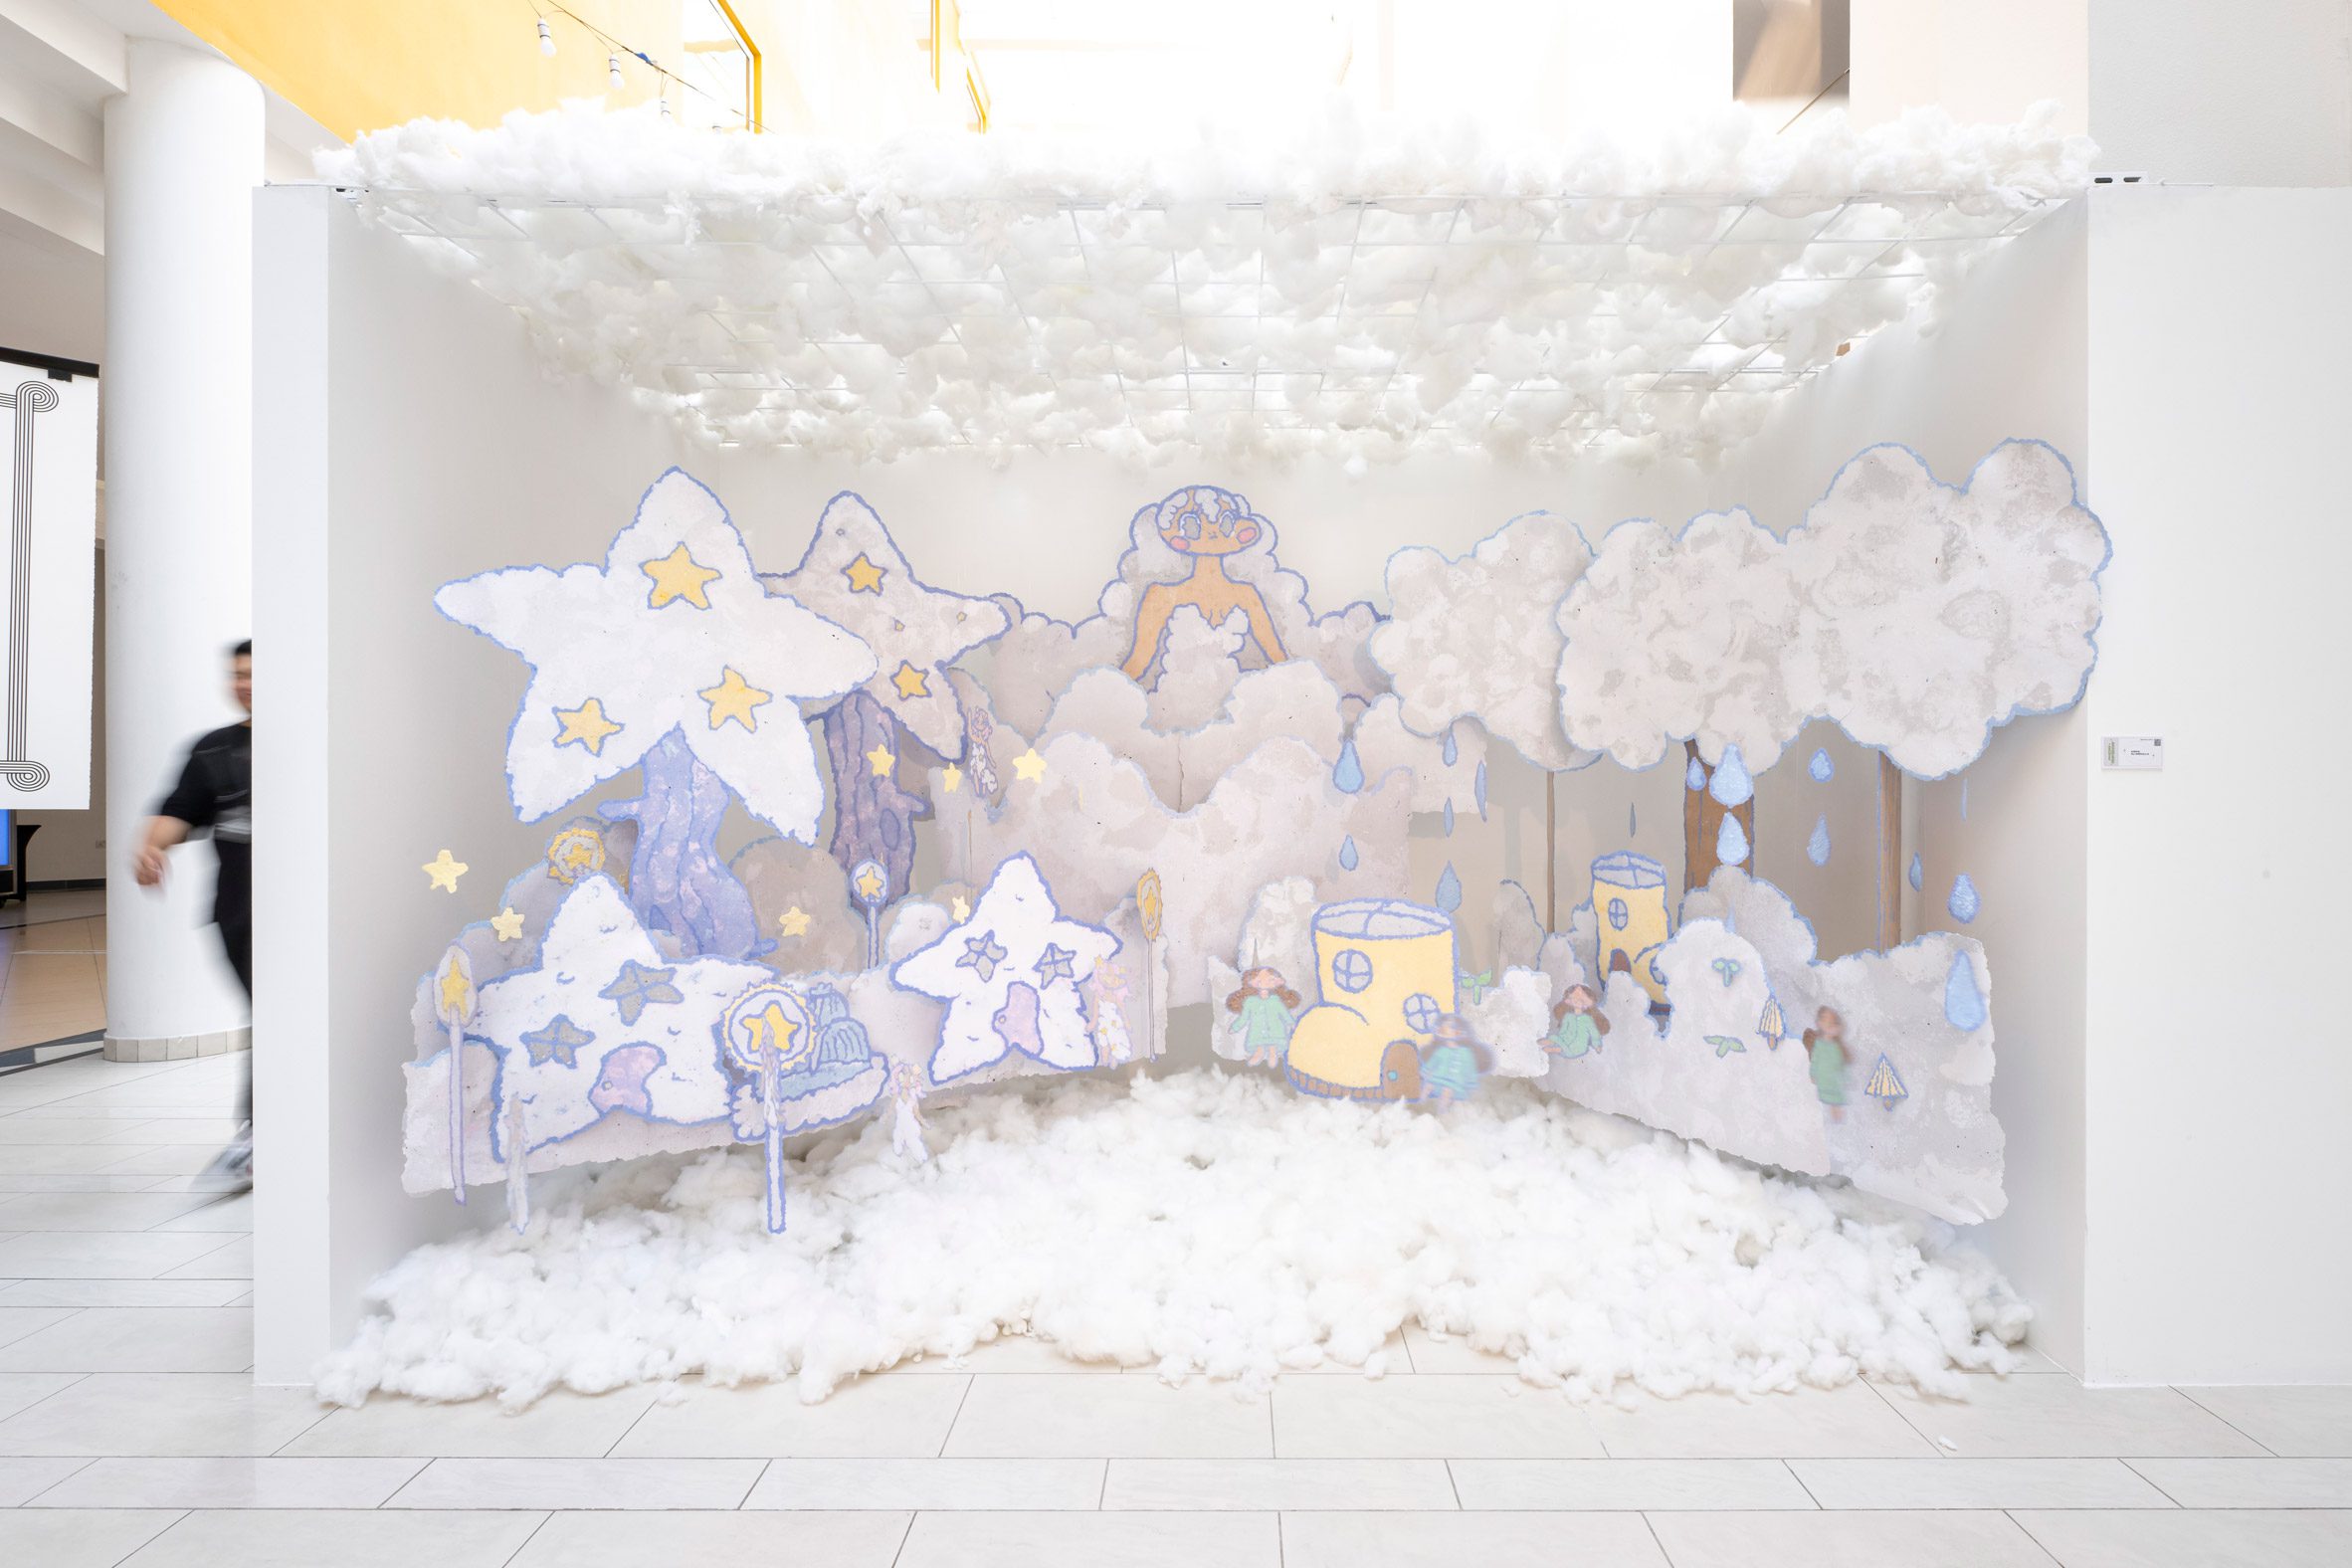 A student installation display with fluffy white clouds and cartoon cut-out star characters